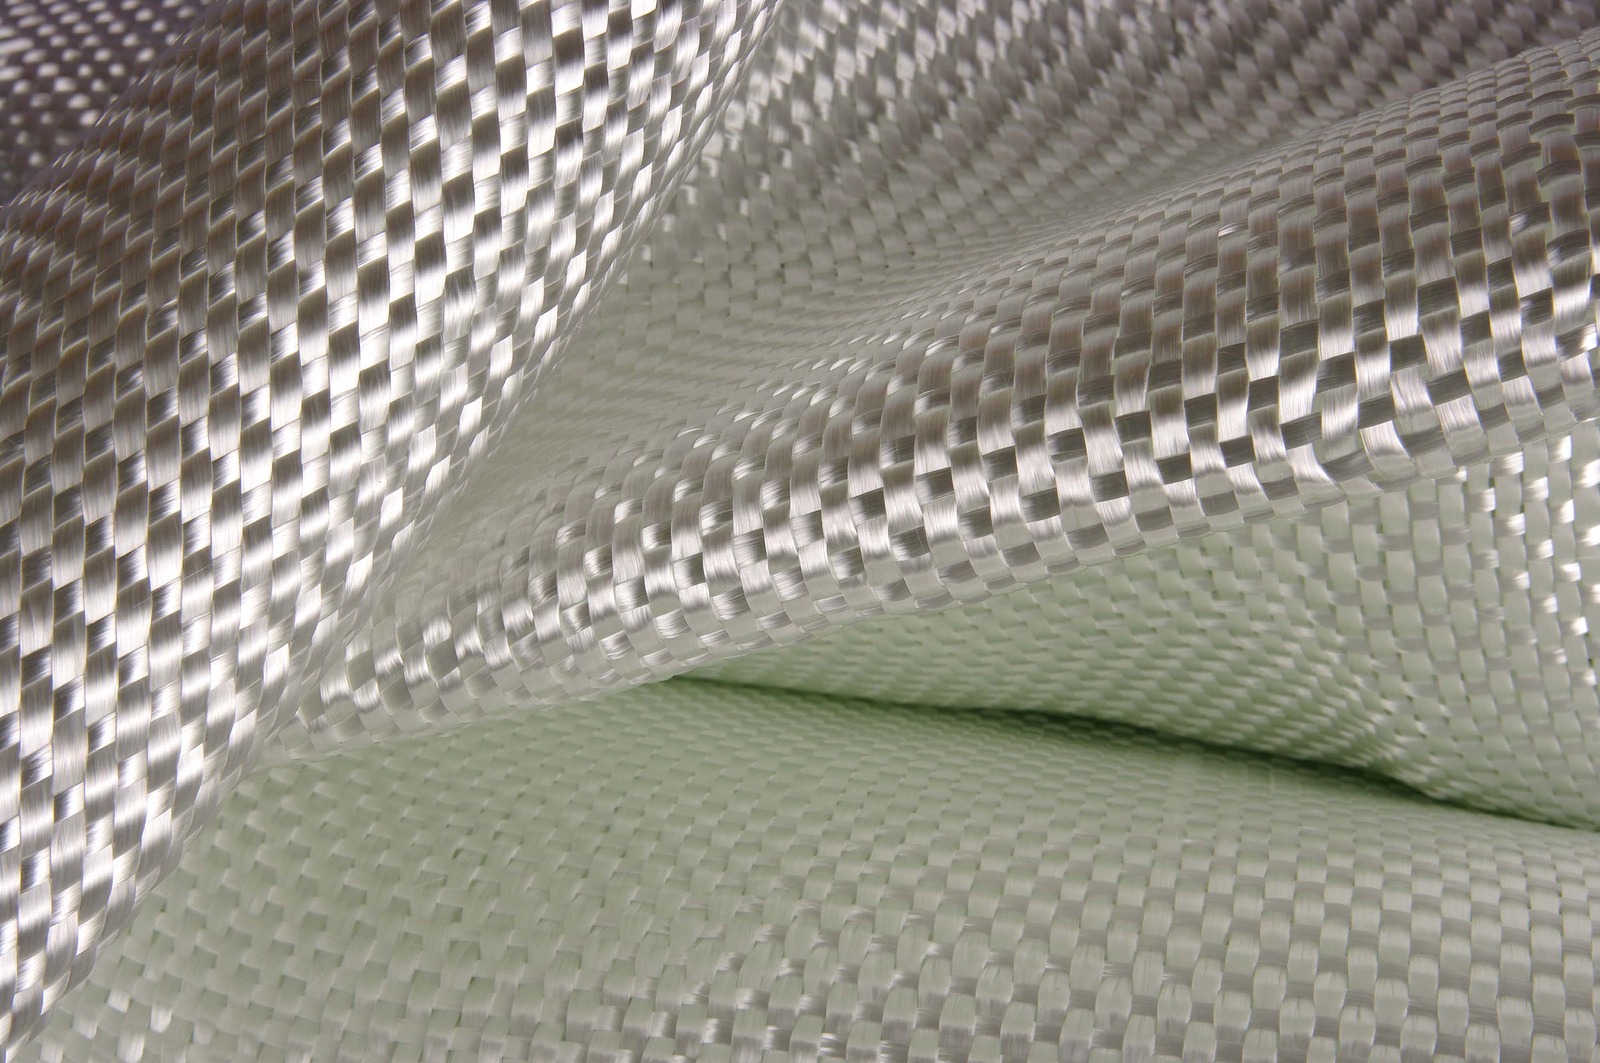 What are the benefits of having a flame resistant fabric?